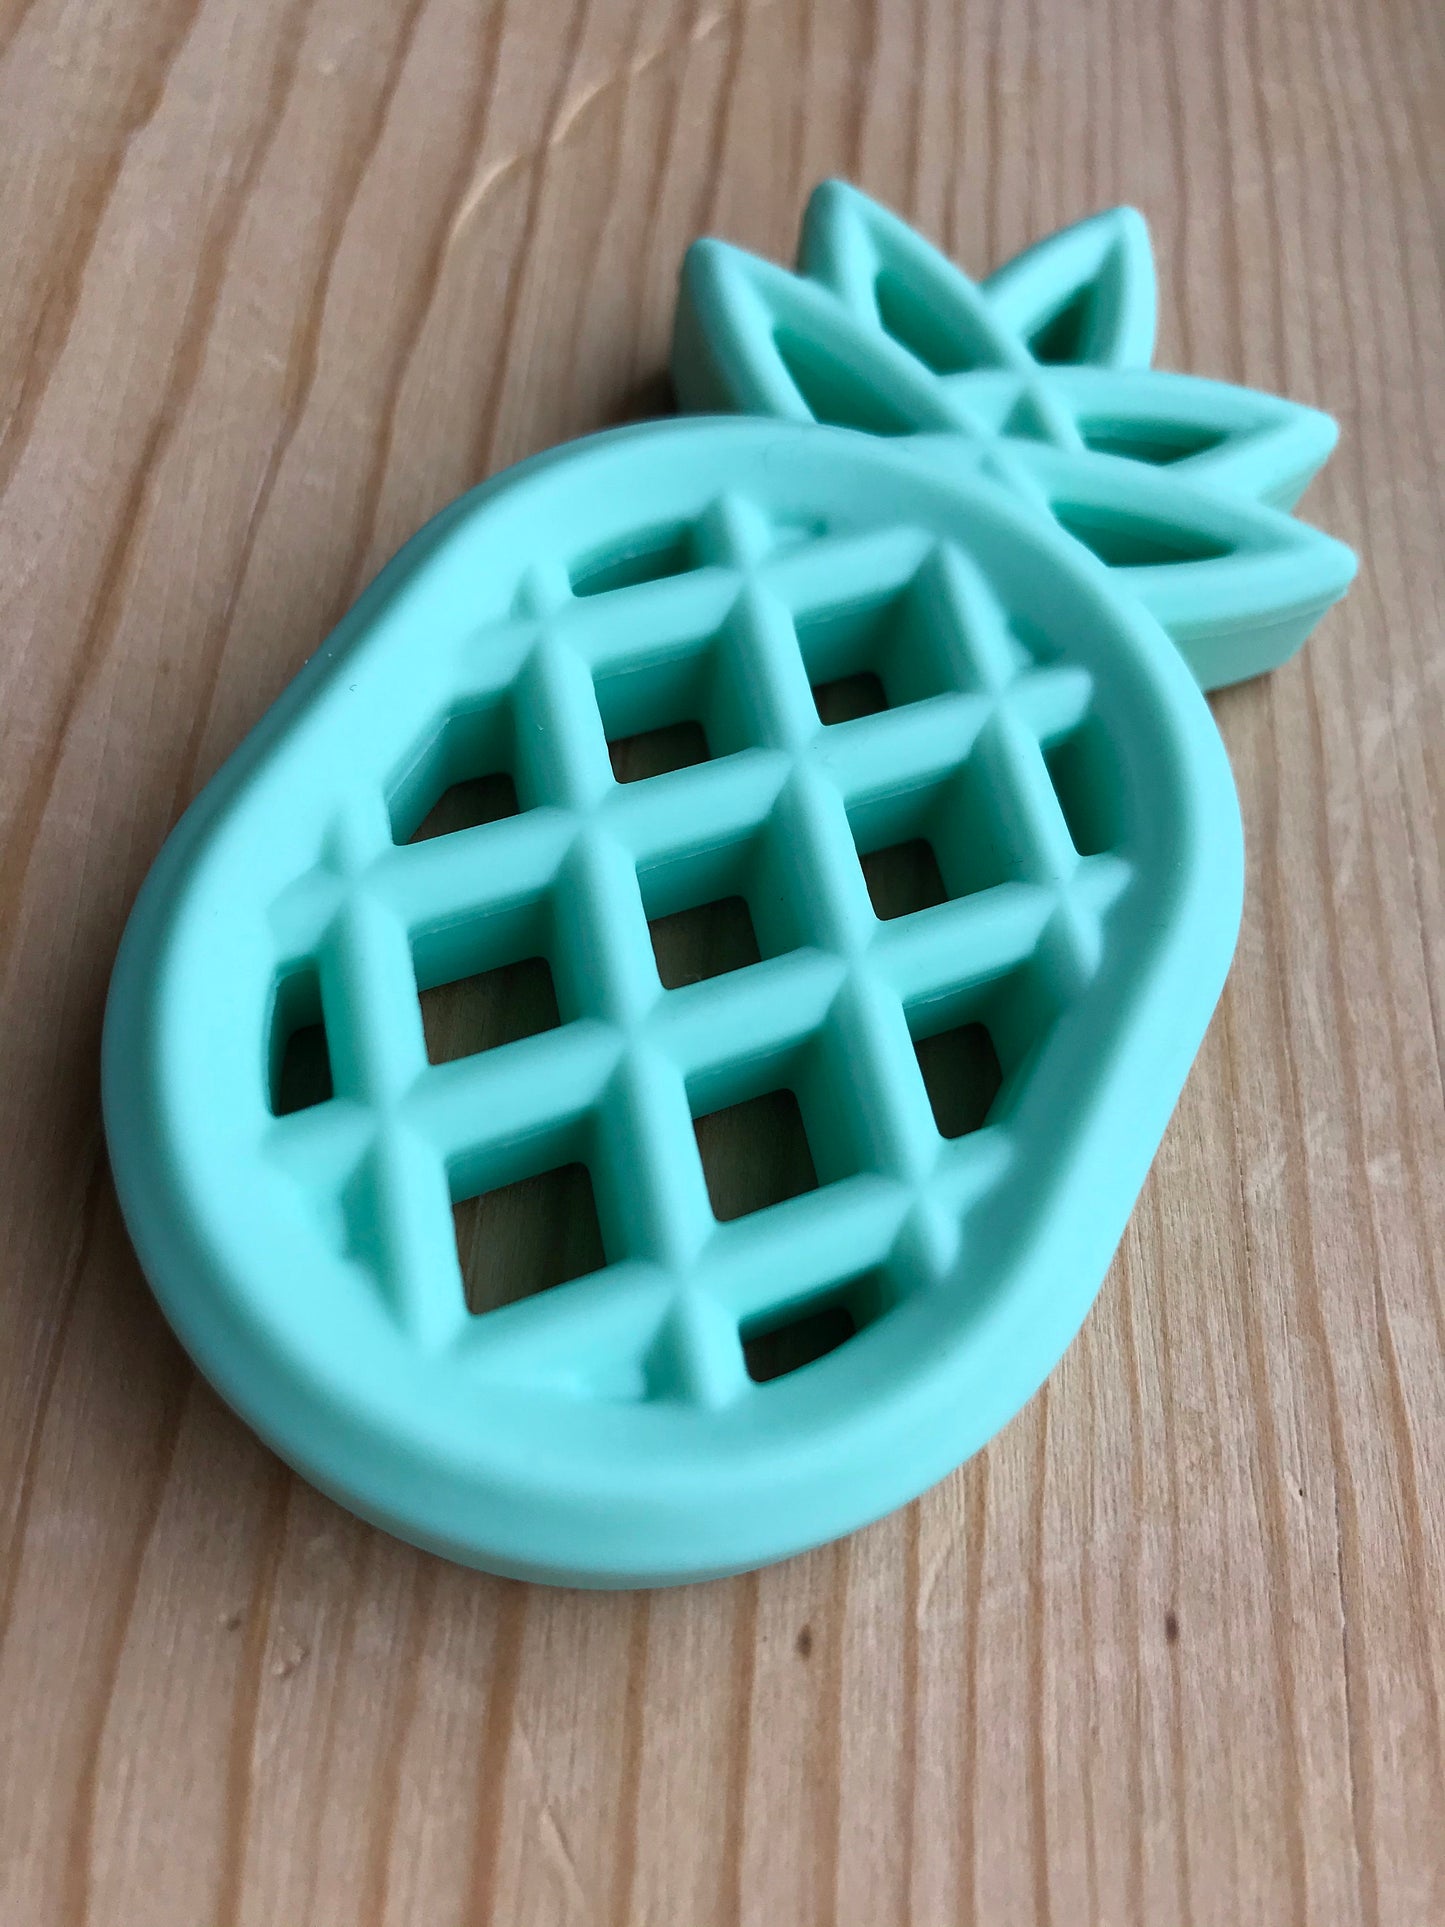 Silicone Pacifier Clip & Pineapple Teether - Turquoise Ombré